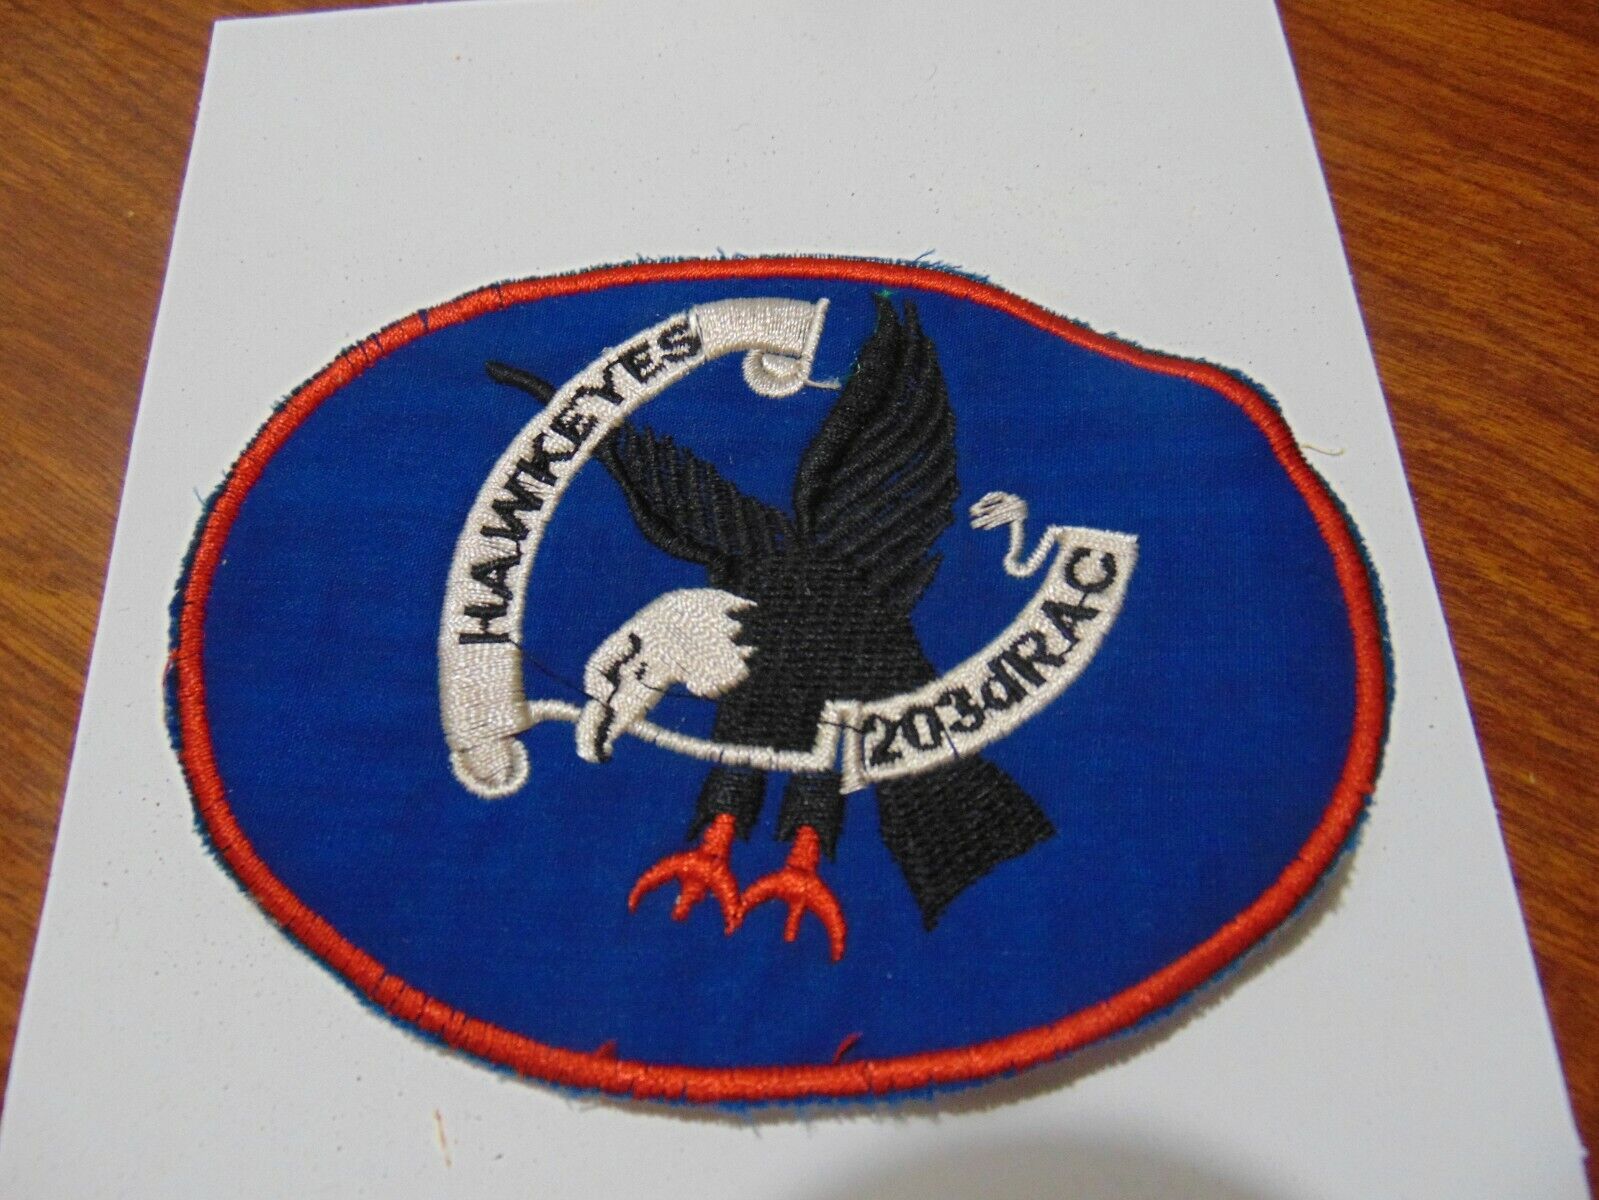 MILITARY PATCH OLD VIETNAM ERA 203RD EAGLE WITH TALONS OVAL SHAPED